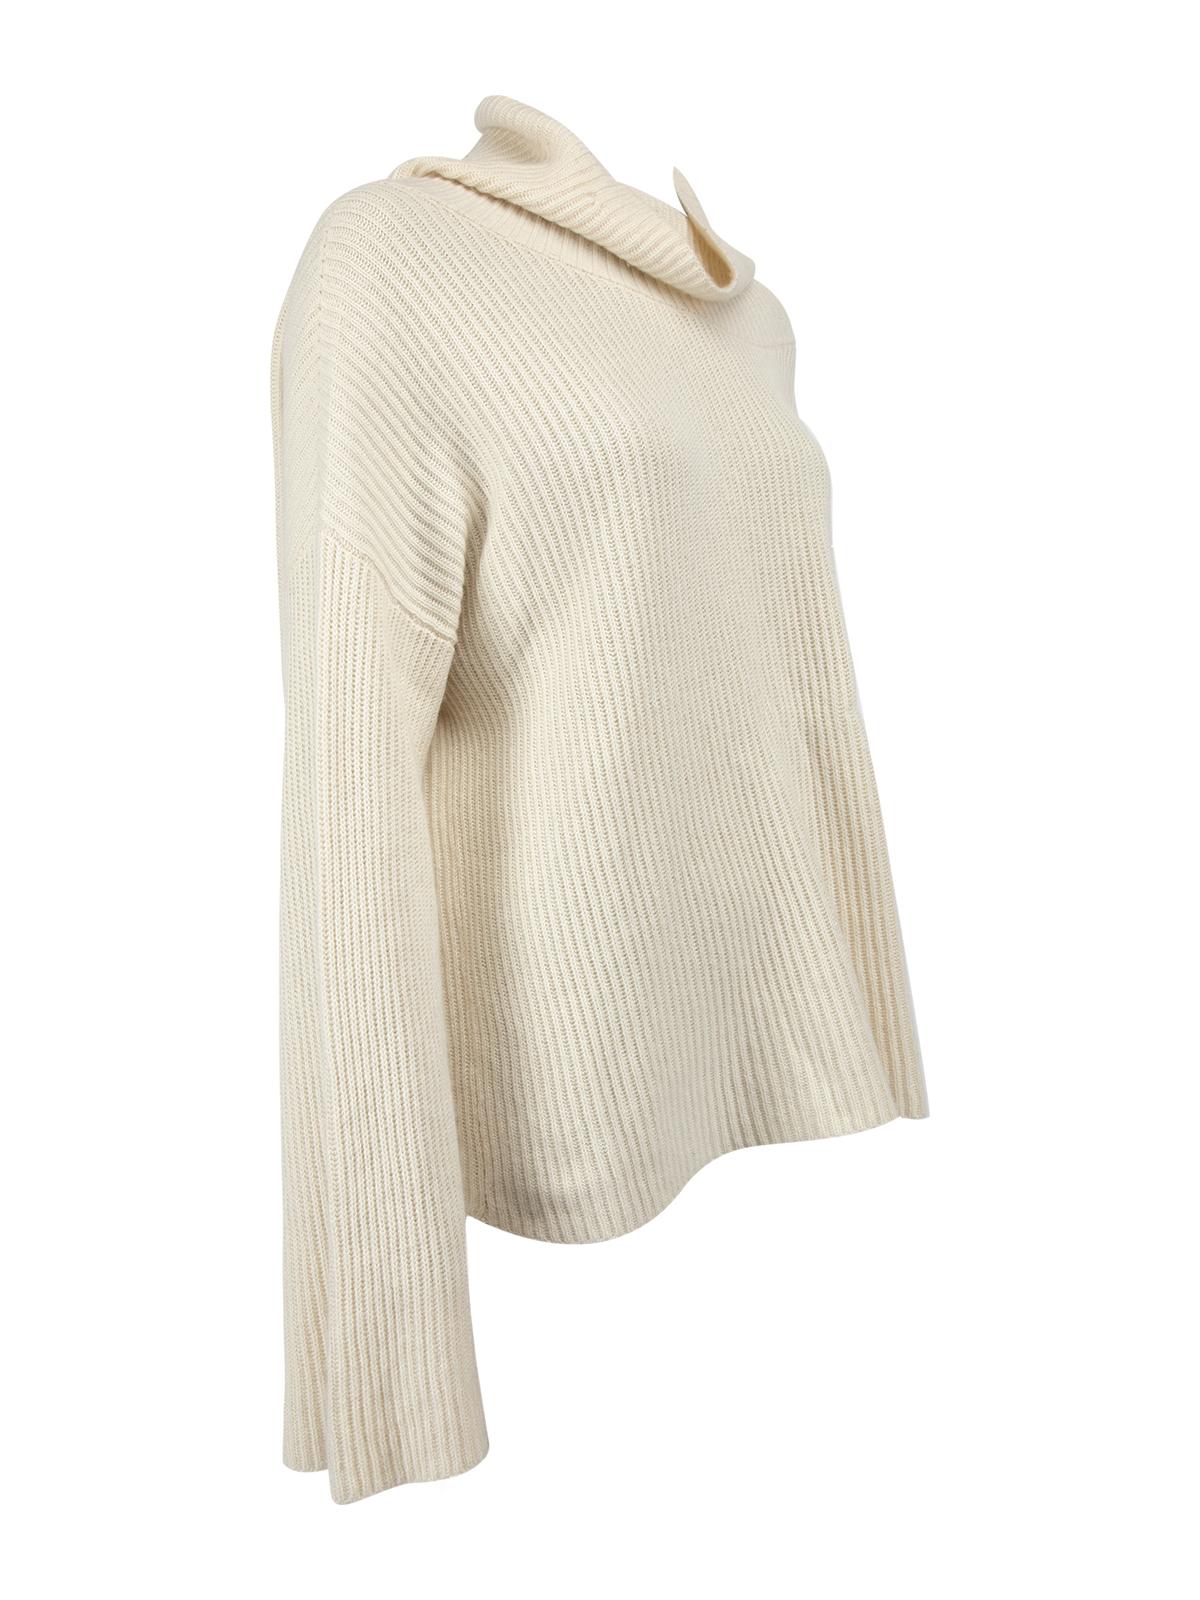 CONDITION is Very good. Minimal wear to sweater is evident. Minimal pilling seen on this used The Row designer resale item. Details Cream Cashmere Knit sweater Turtleneck Oversize Long wide sleeves Made in USA Composition 50% Cashmere and 50% Silk